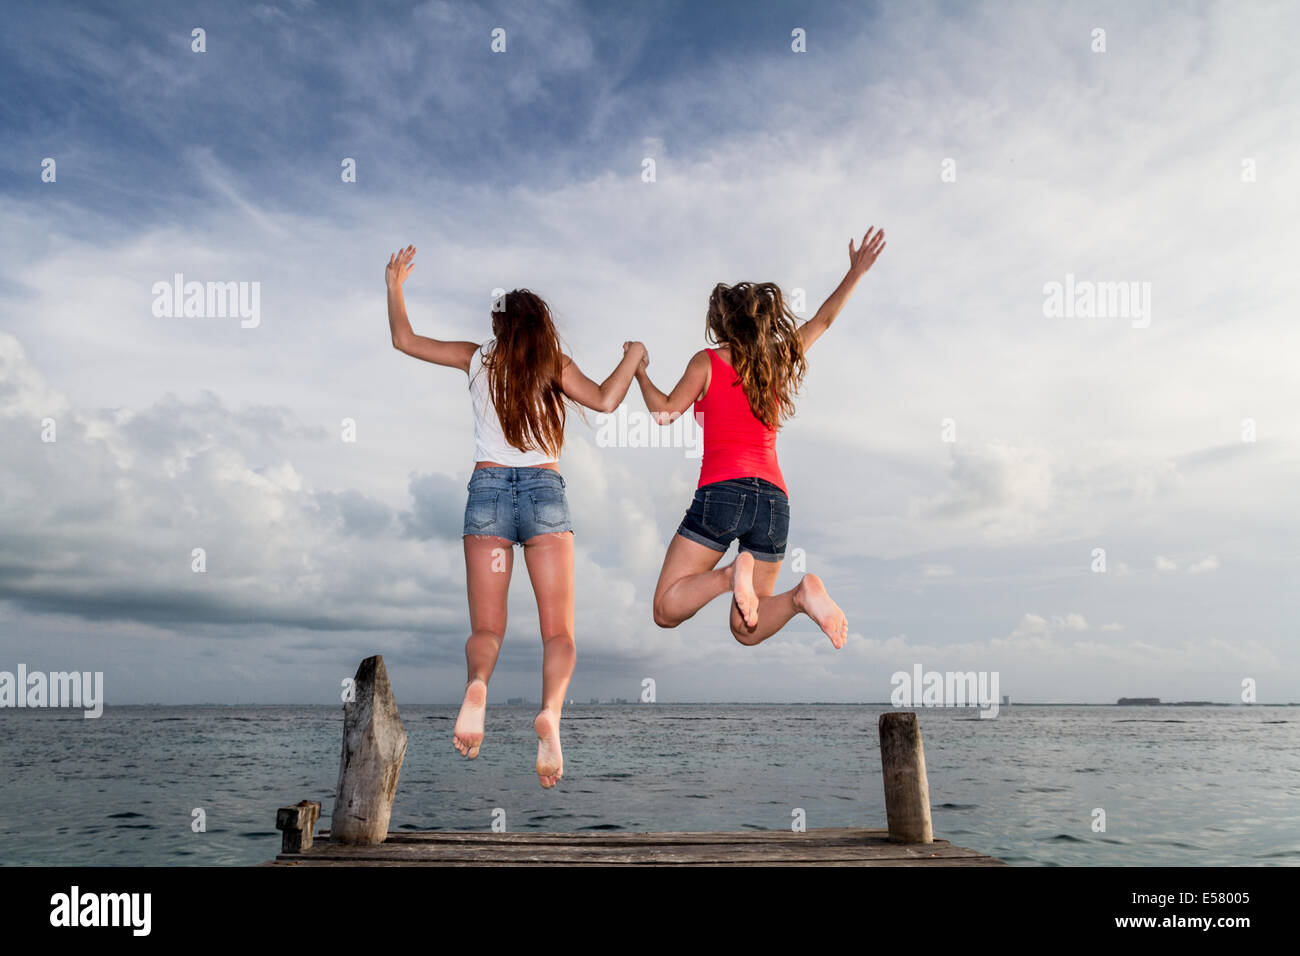 Two young girls jumping in happiness in a stunning seascape at the pier Stock Photo